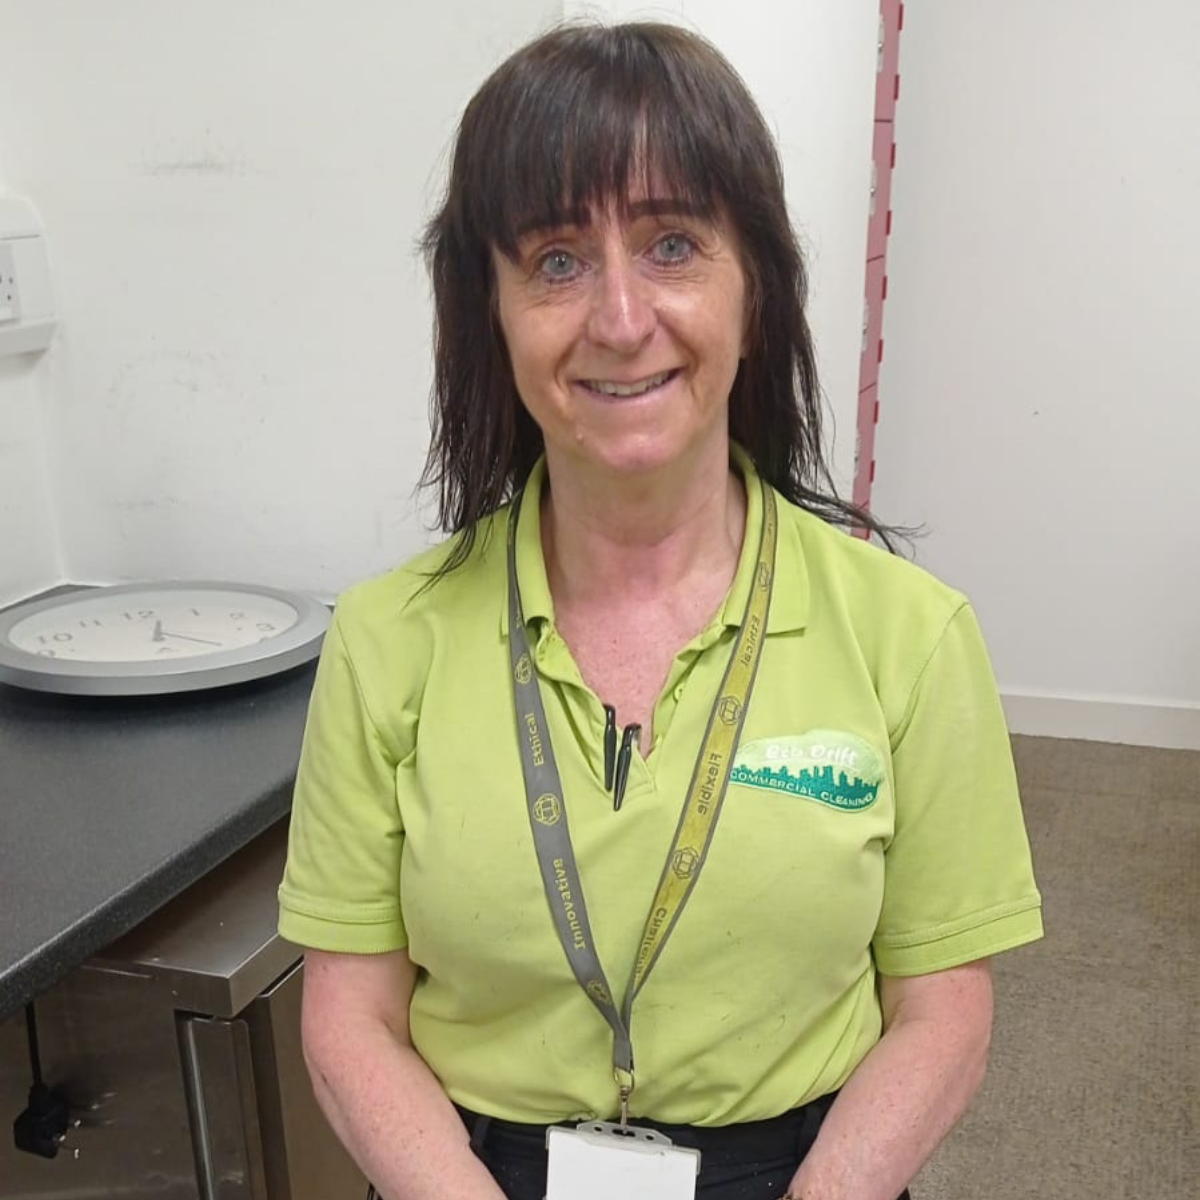 Our team in the spotlight: Teresa Featherstone